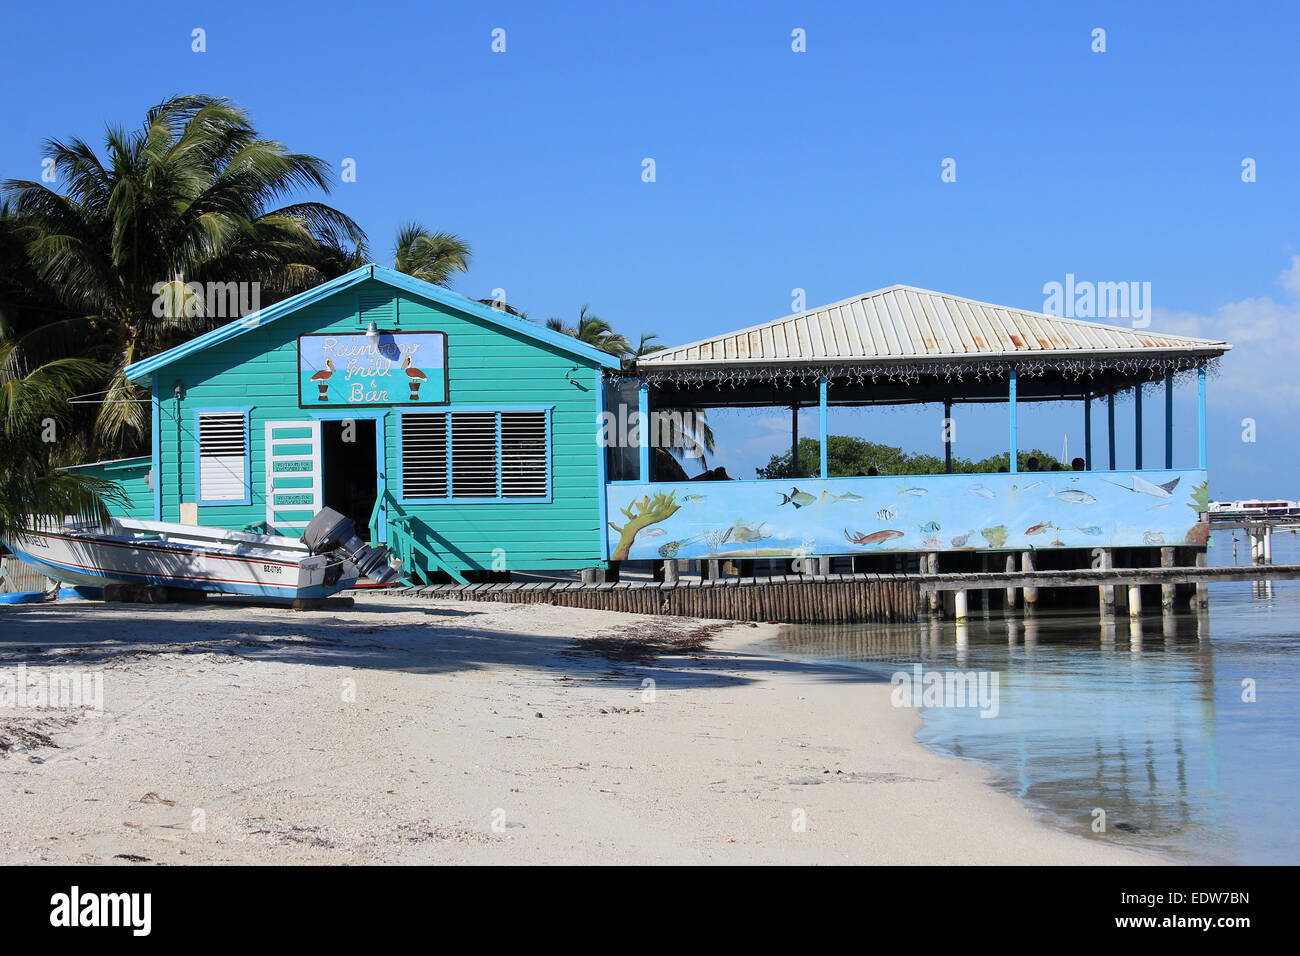 Rainbow Bar And Grill On Caye Caulker, Belize Stock Photo